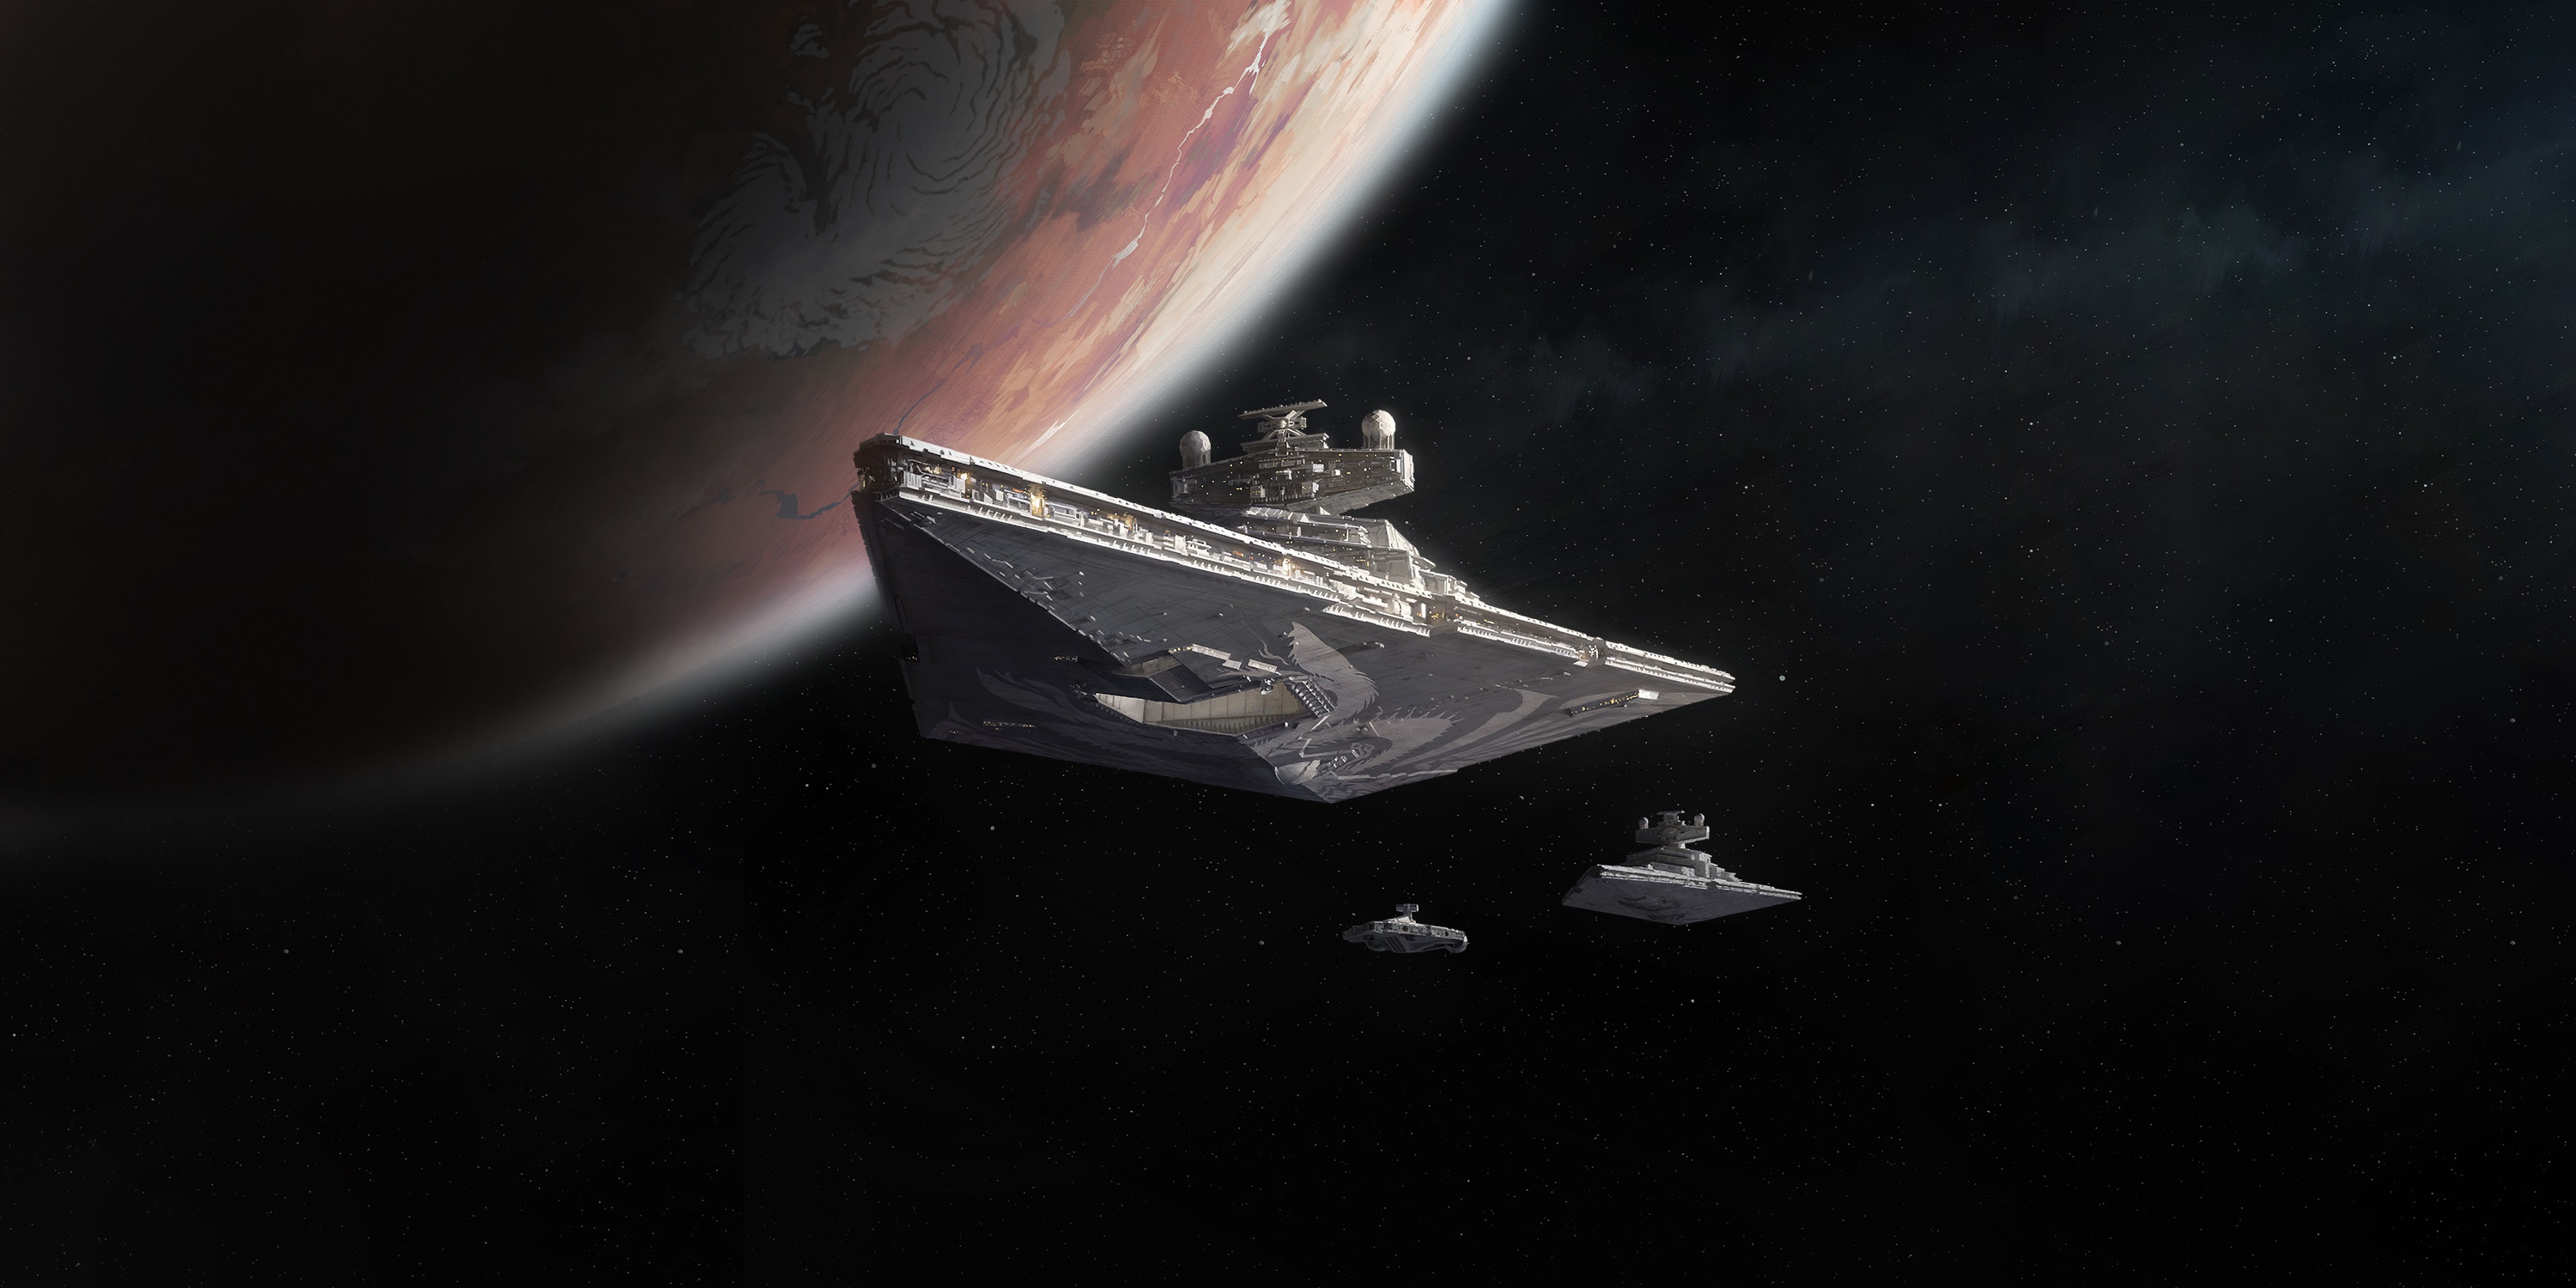 General 3000x1500 Star Wars Imperial Forces science fiction spaceship Star Wars Ships Star Destroyer movies